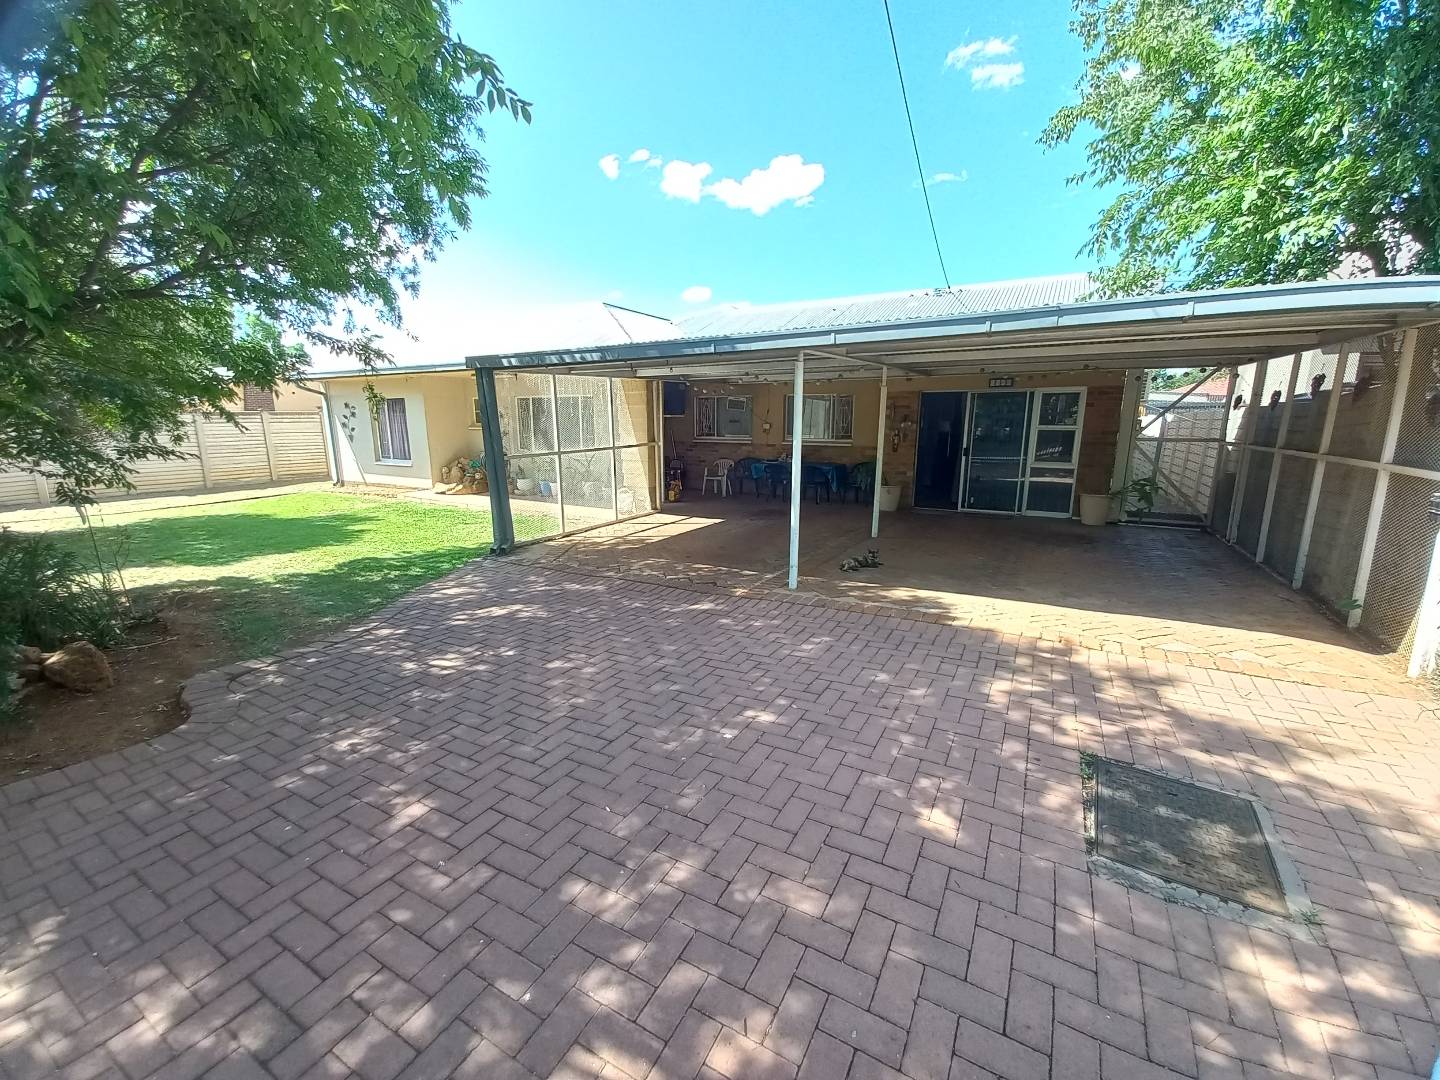 4 Bedroom Property for Sale in Hospitaalpark Free State